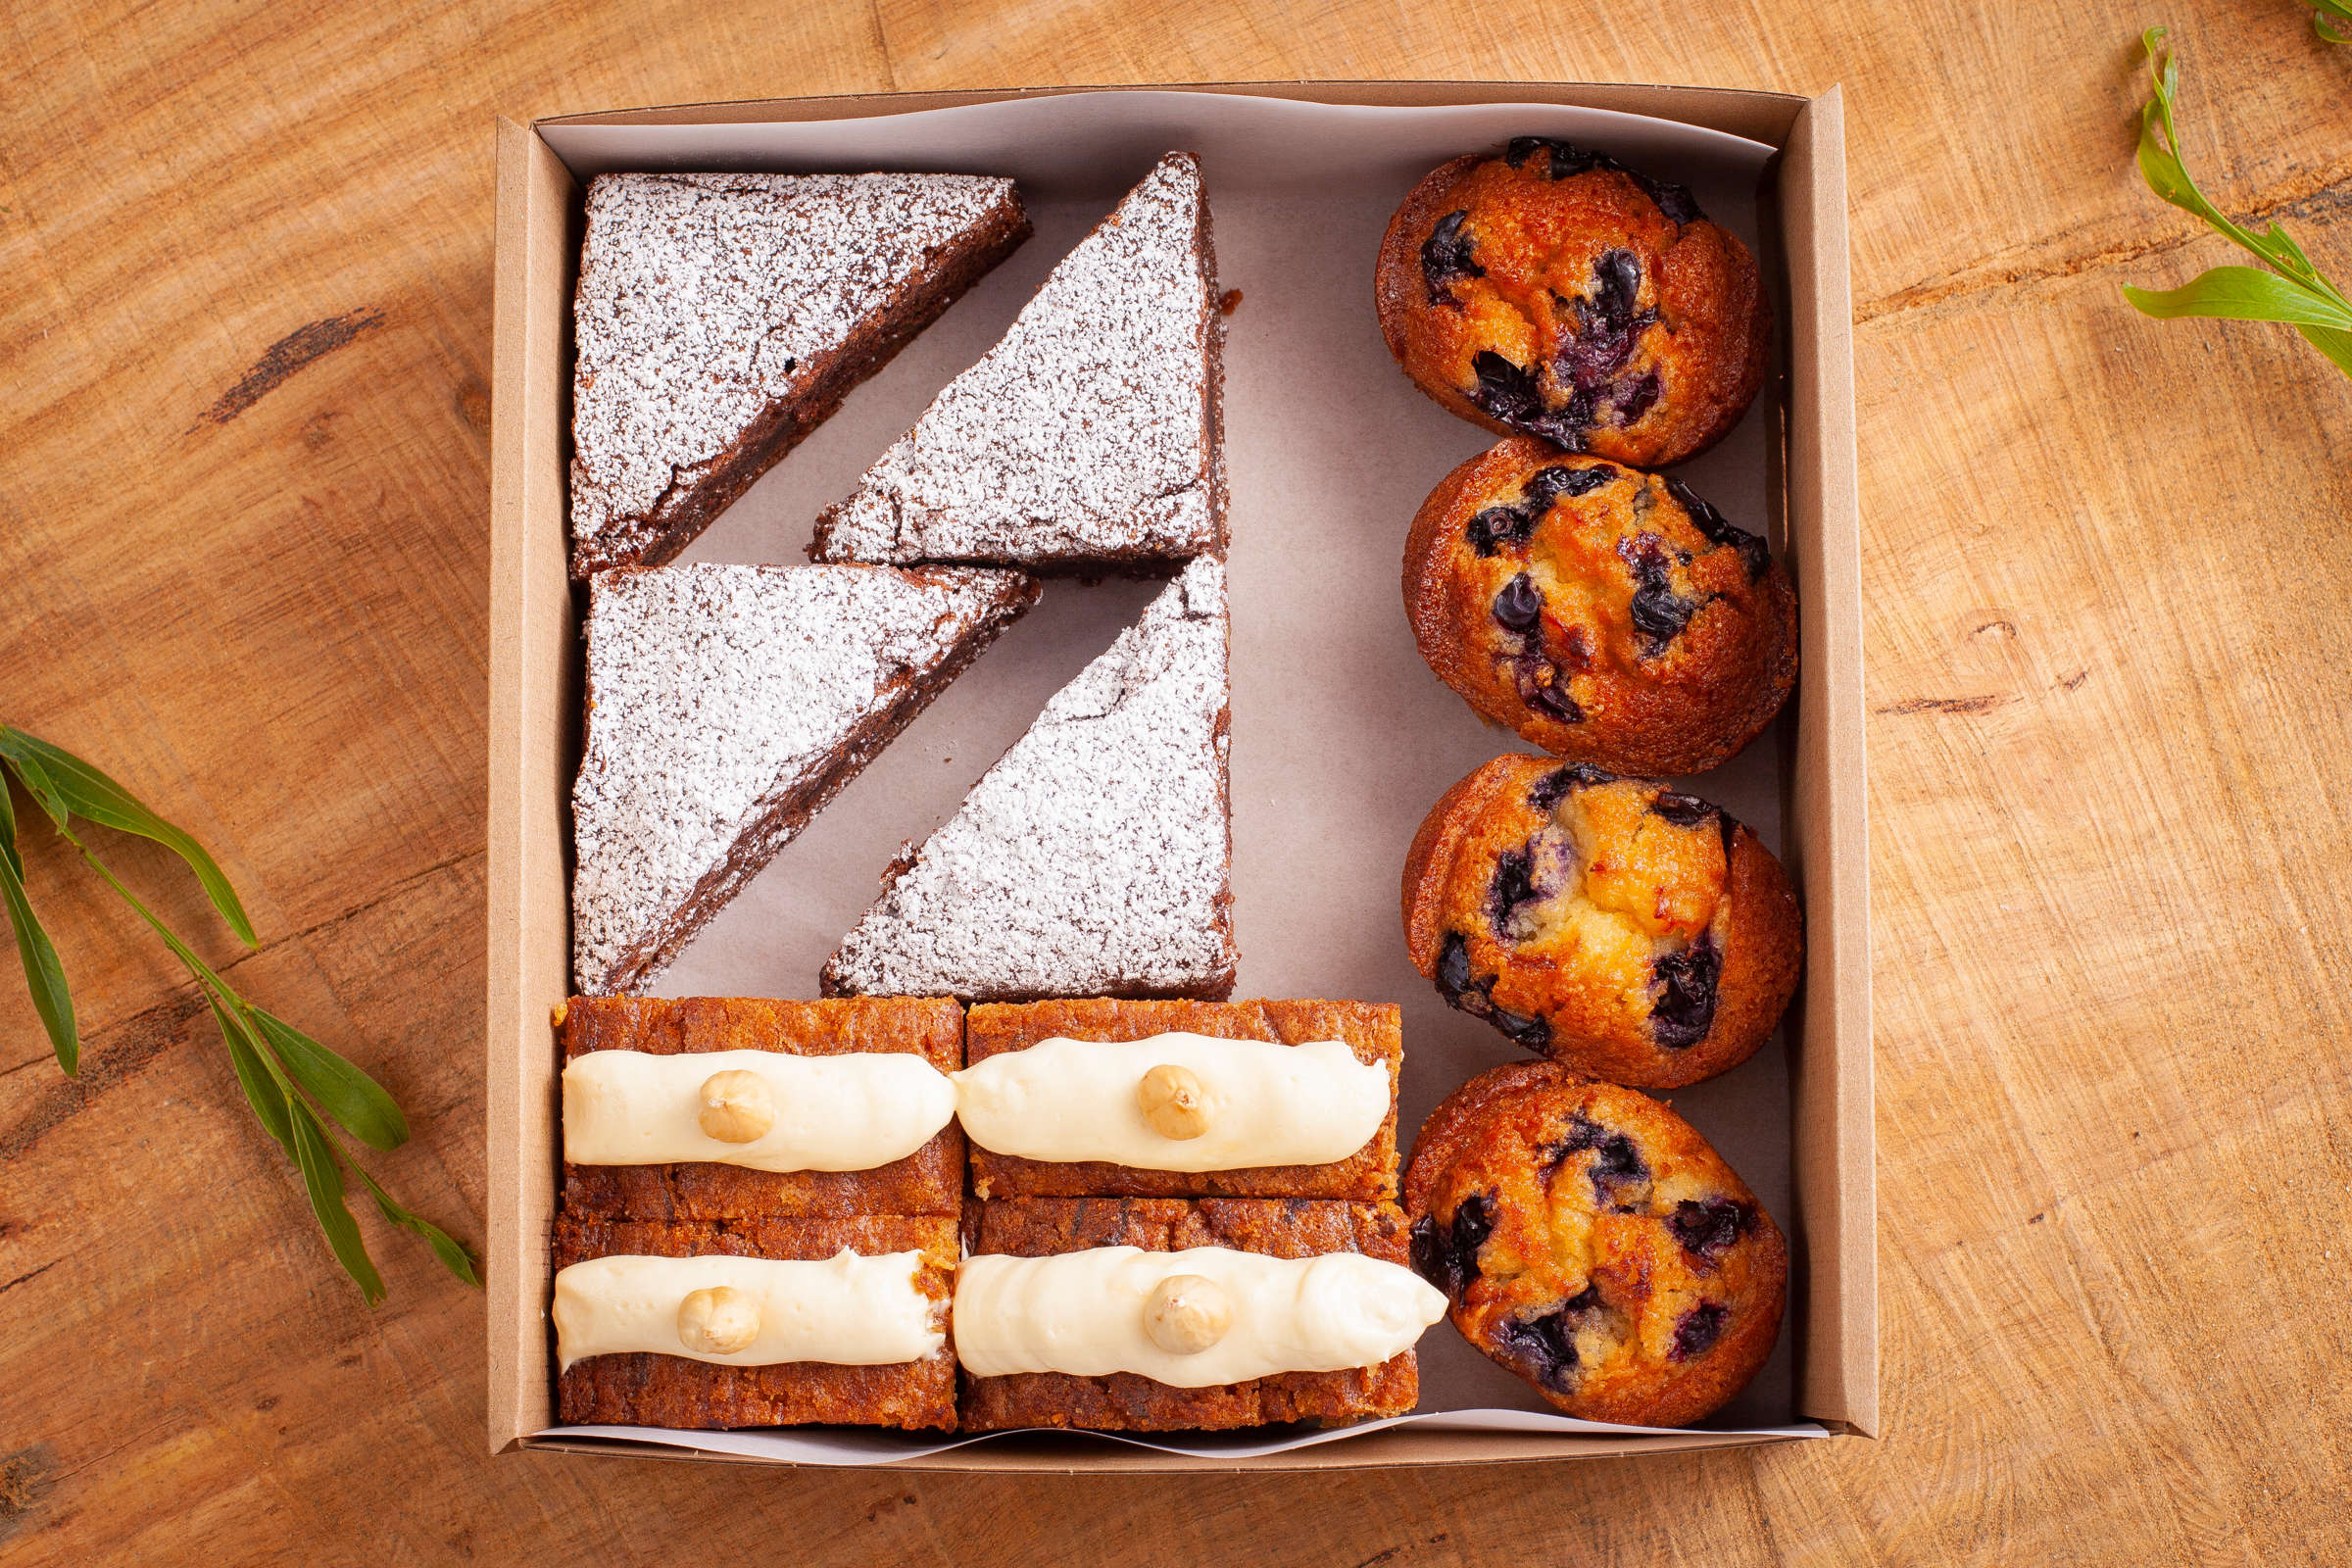 Gluten-free sweet box containing 12 items including chocolate brownie, friands, cake. Credit: Richard Jupe.